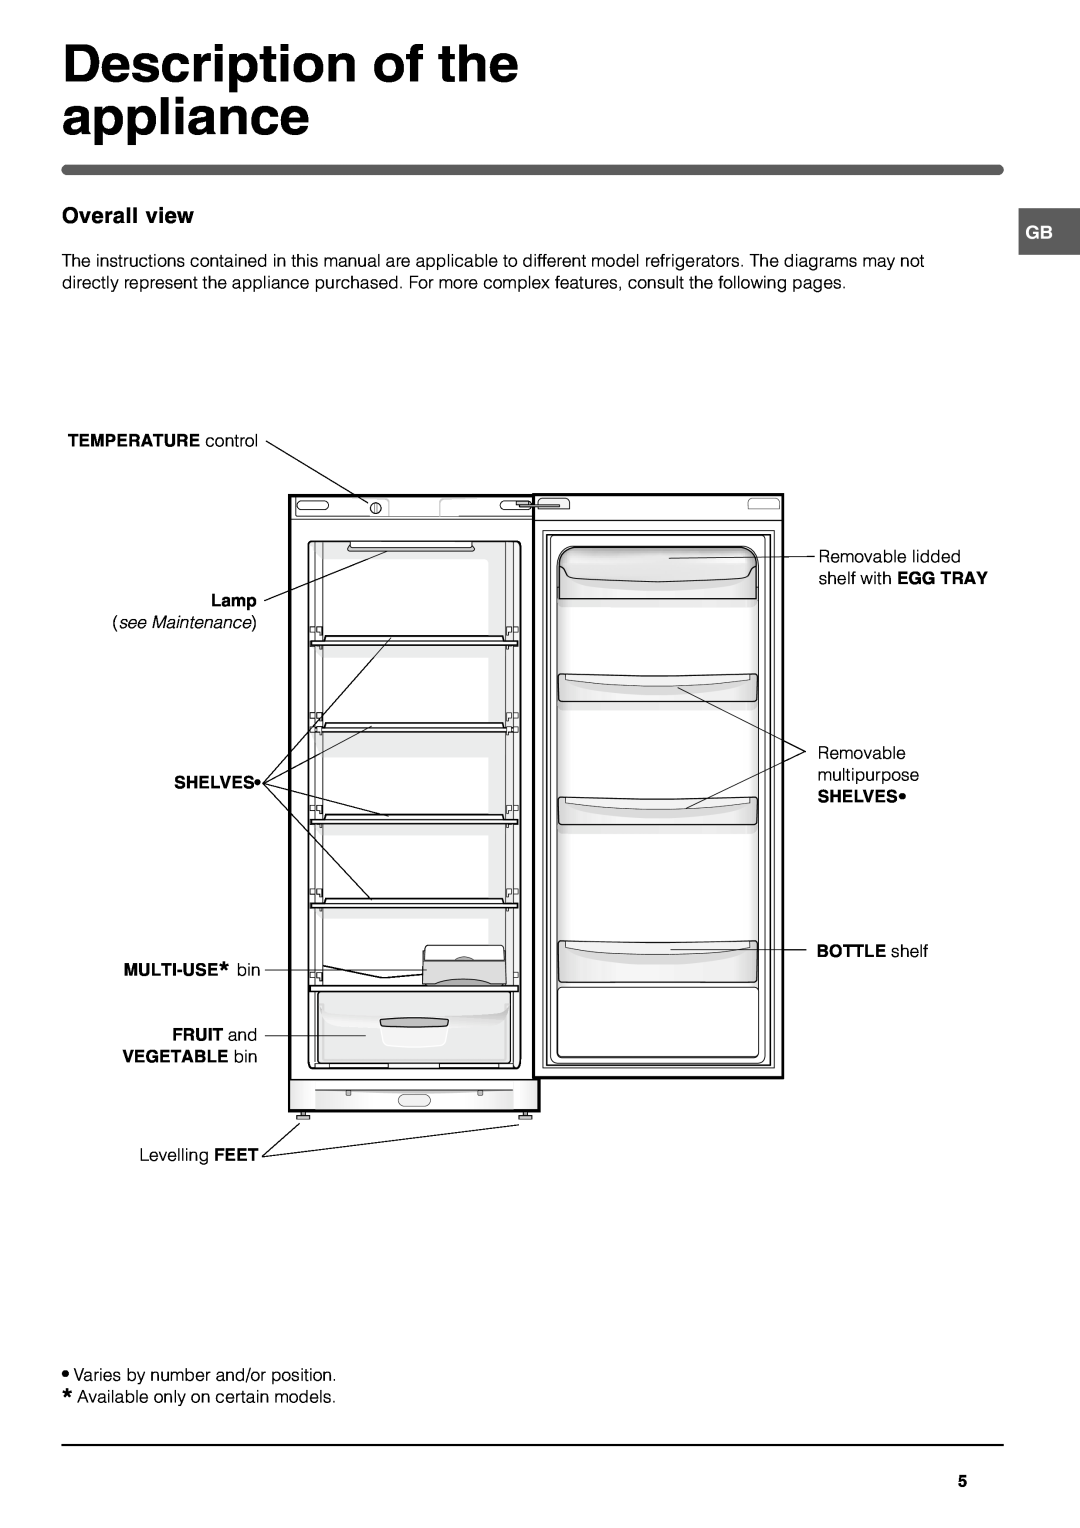 Indesit SAAN 300 Description of the appliance, Overall view, TEMPERATURE control, Lamp, see Maintenance, Shelves, SHELVESù 